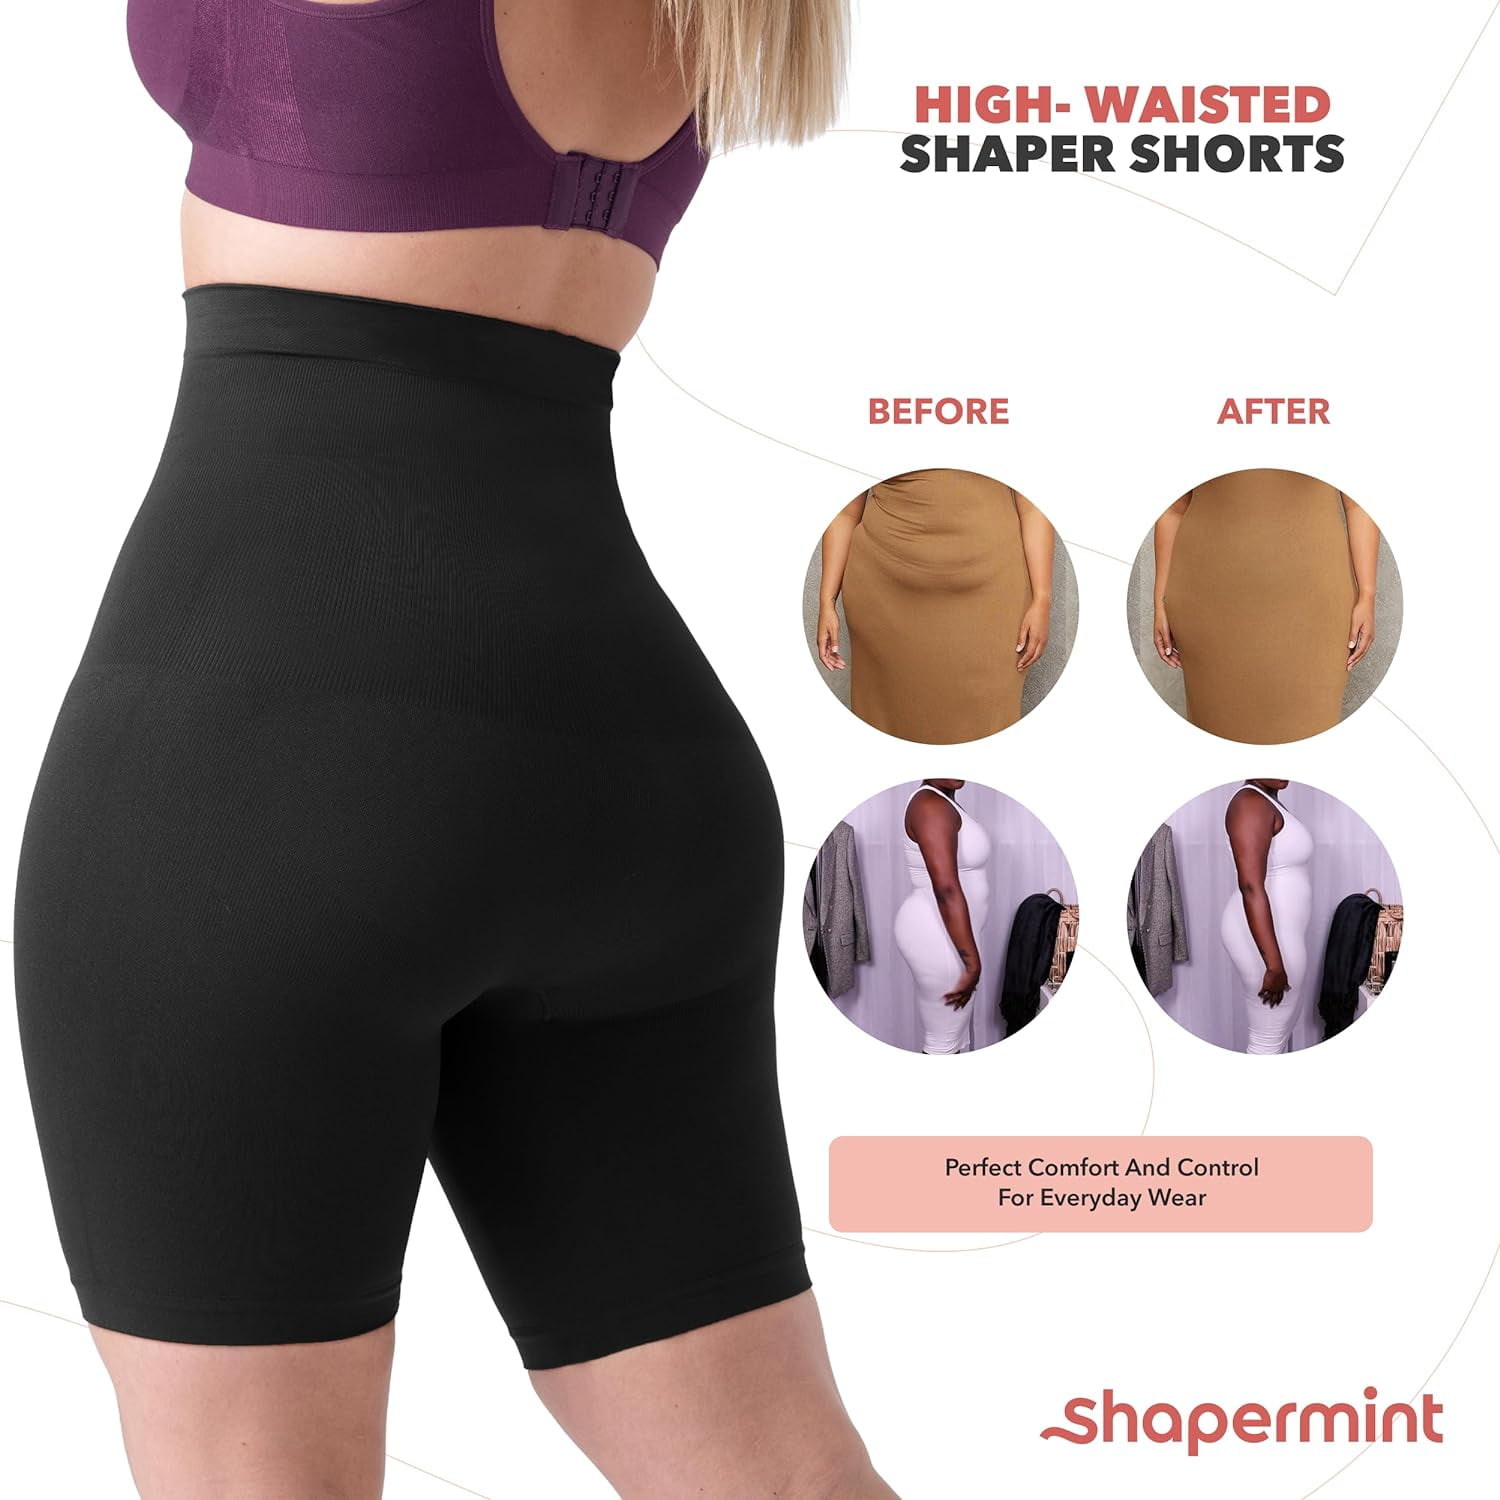 Shapermint Women's All Day Every Day High Waisted Shaper Shorts 